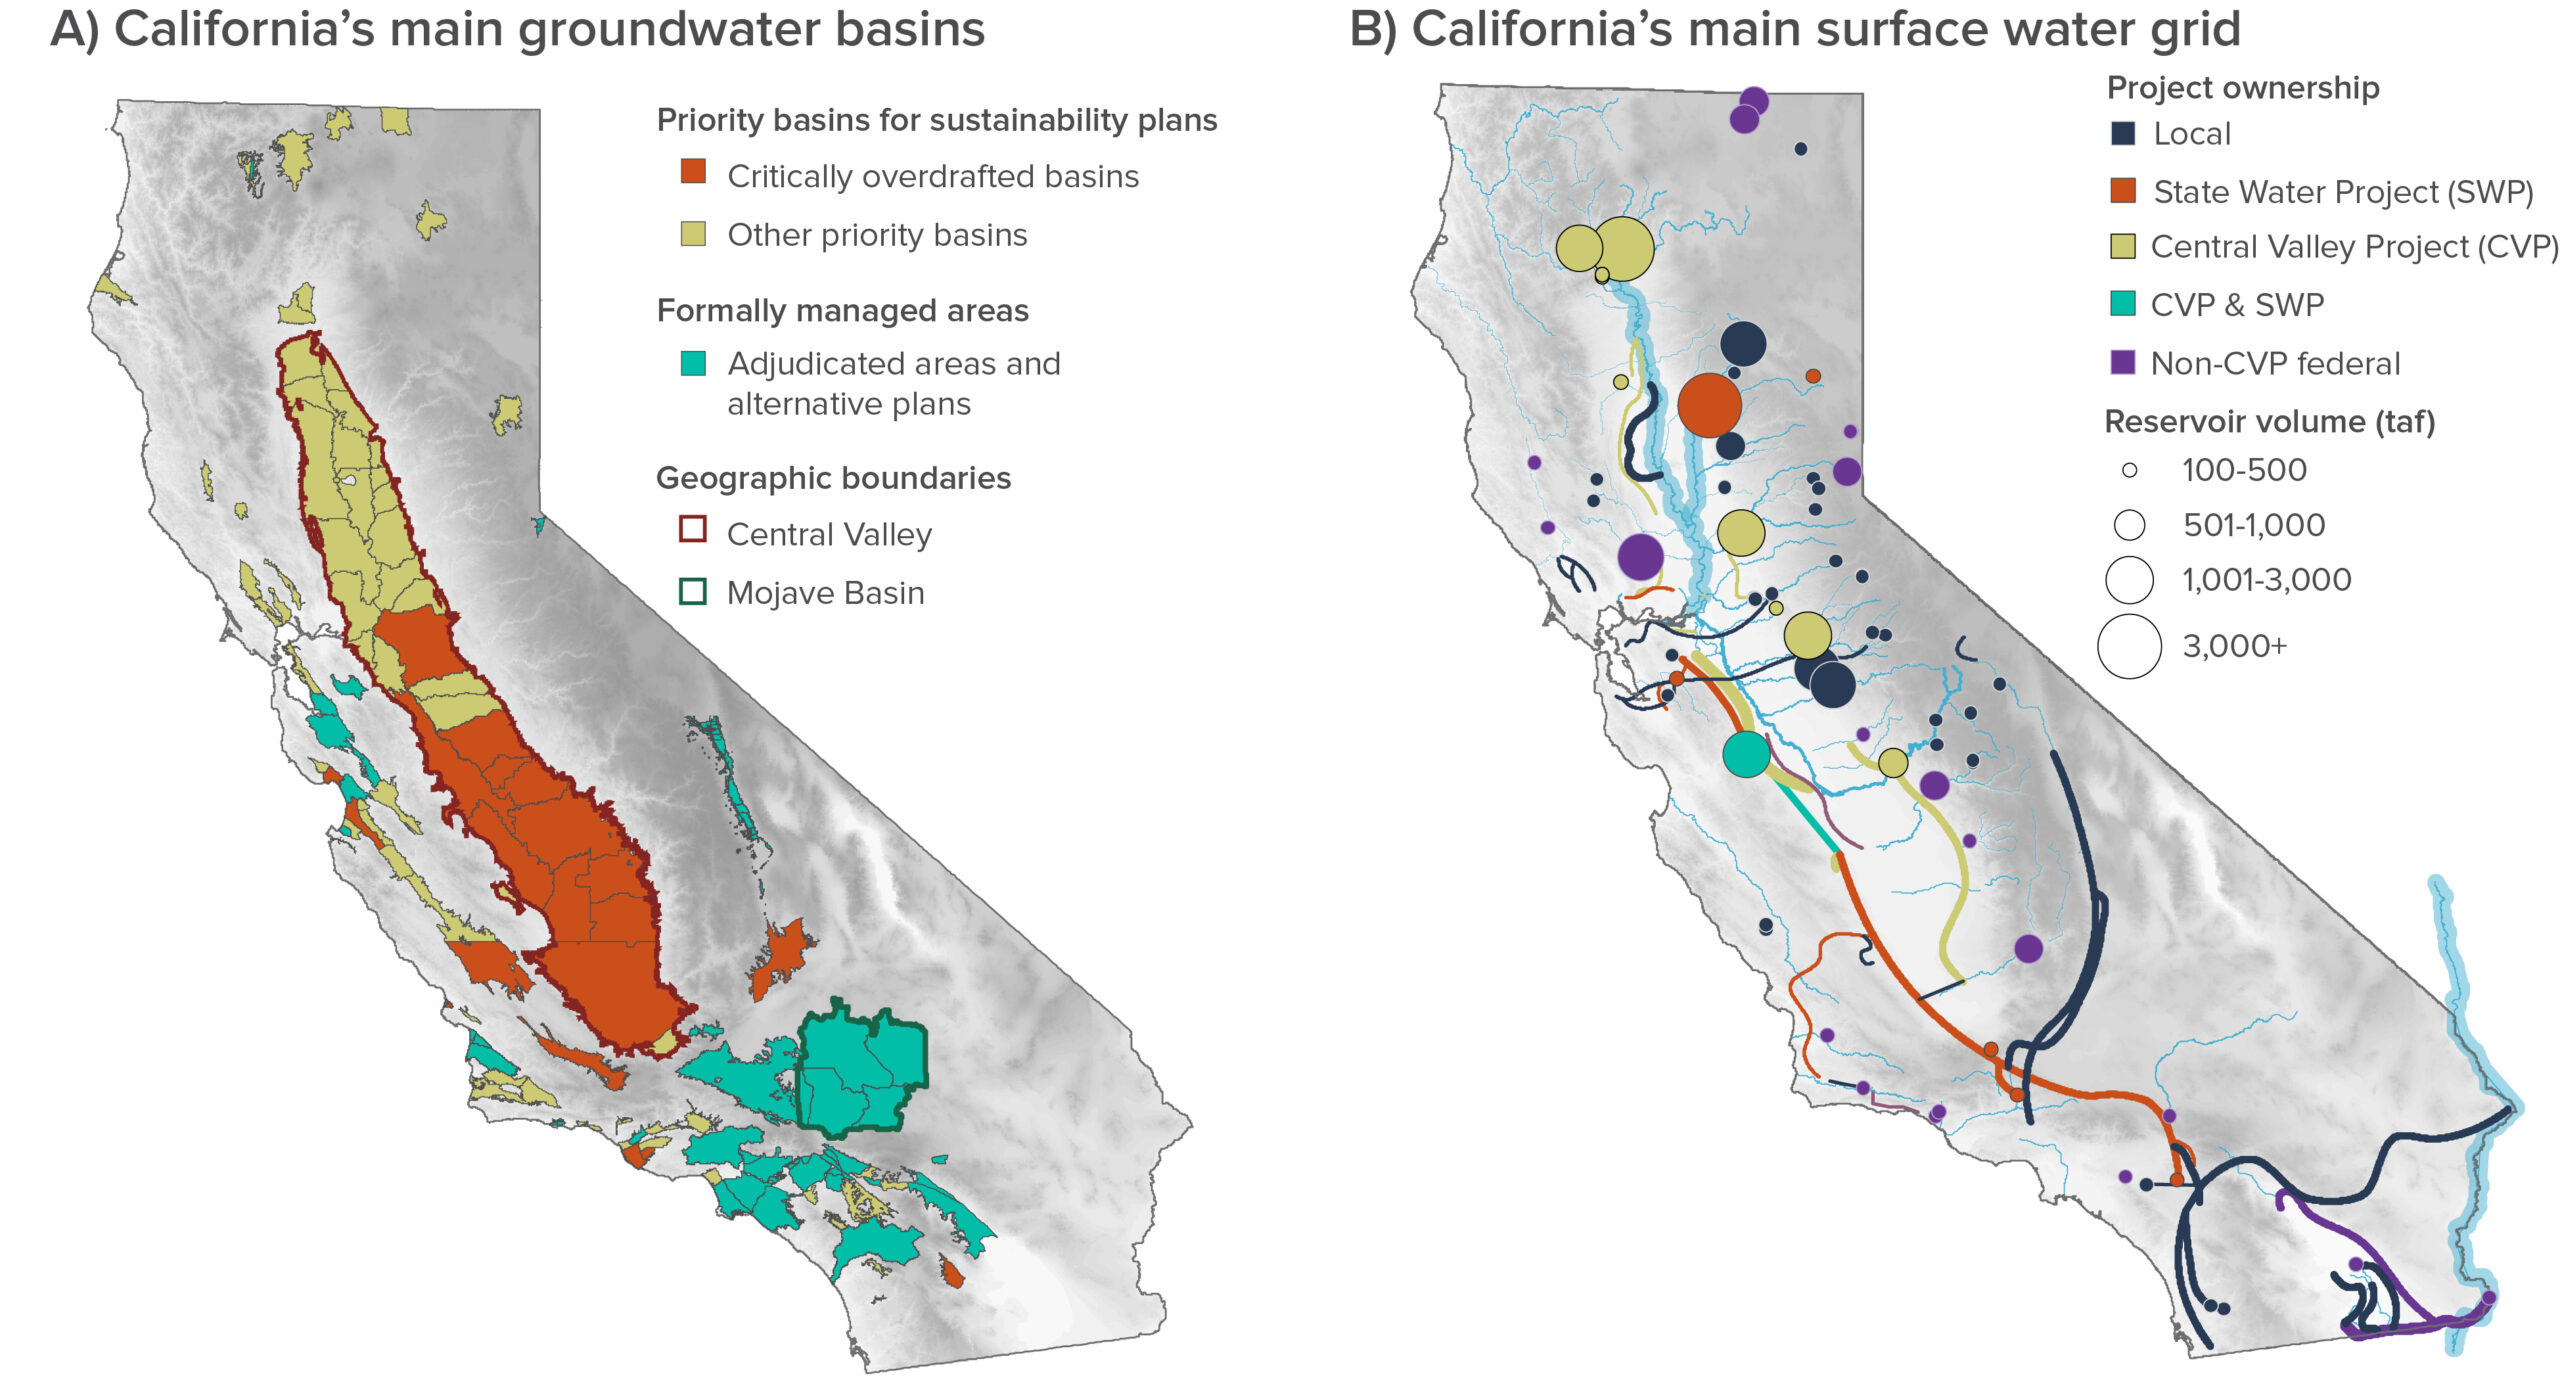 figure - Basins in the Central Valley are more connected to each other and to surface water conveyance